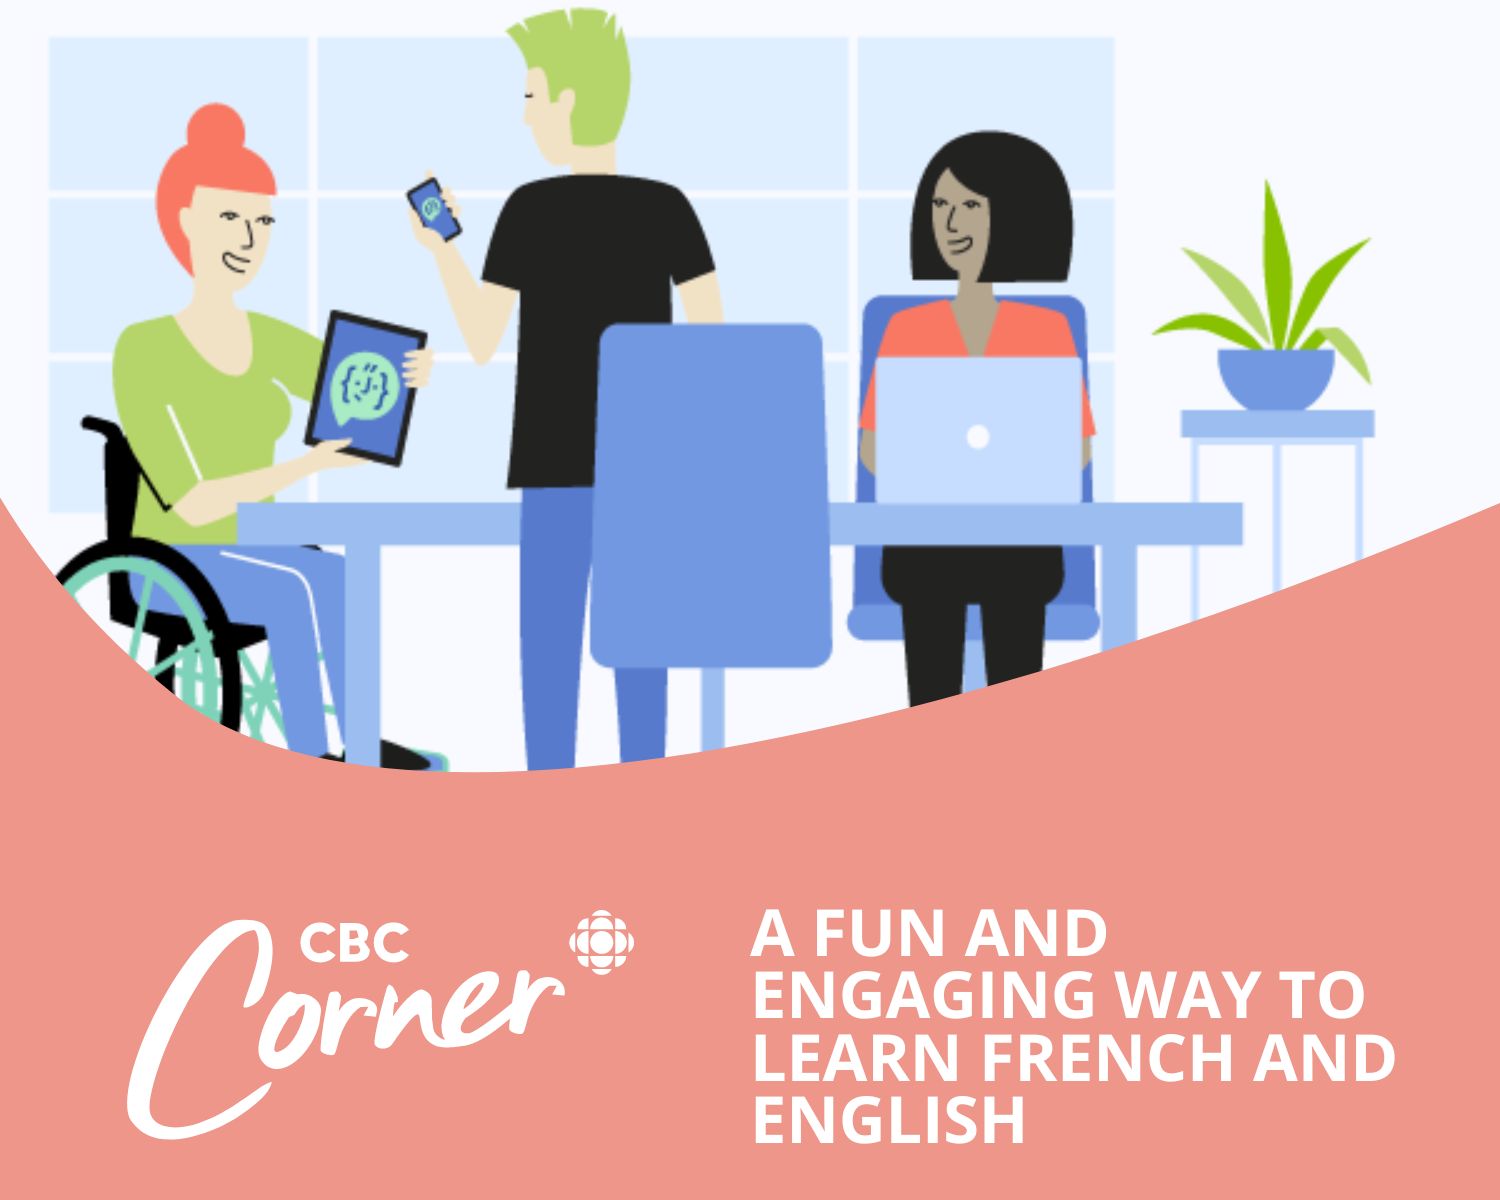 CBC Corner: Mauril - "A fun and engaging way to learn english and french" - Three people at a desk